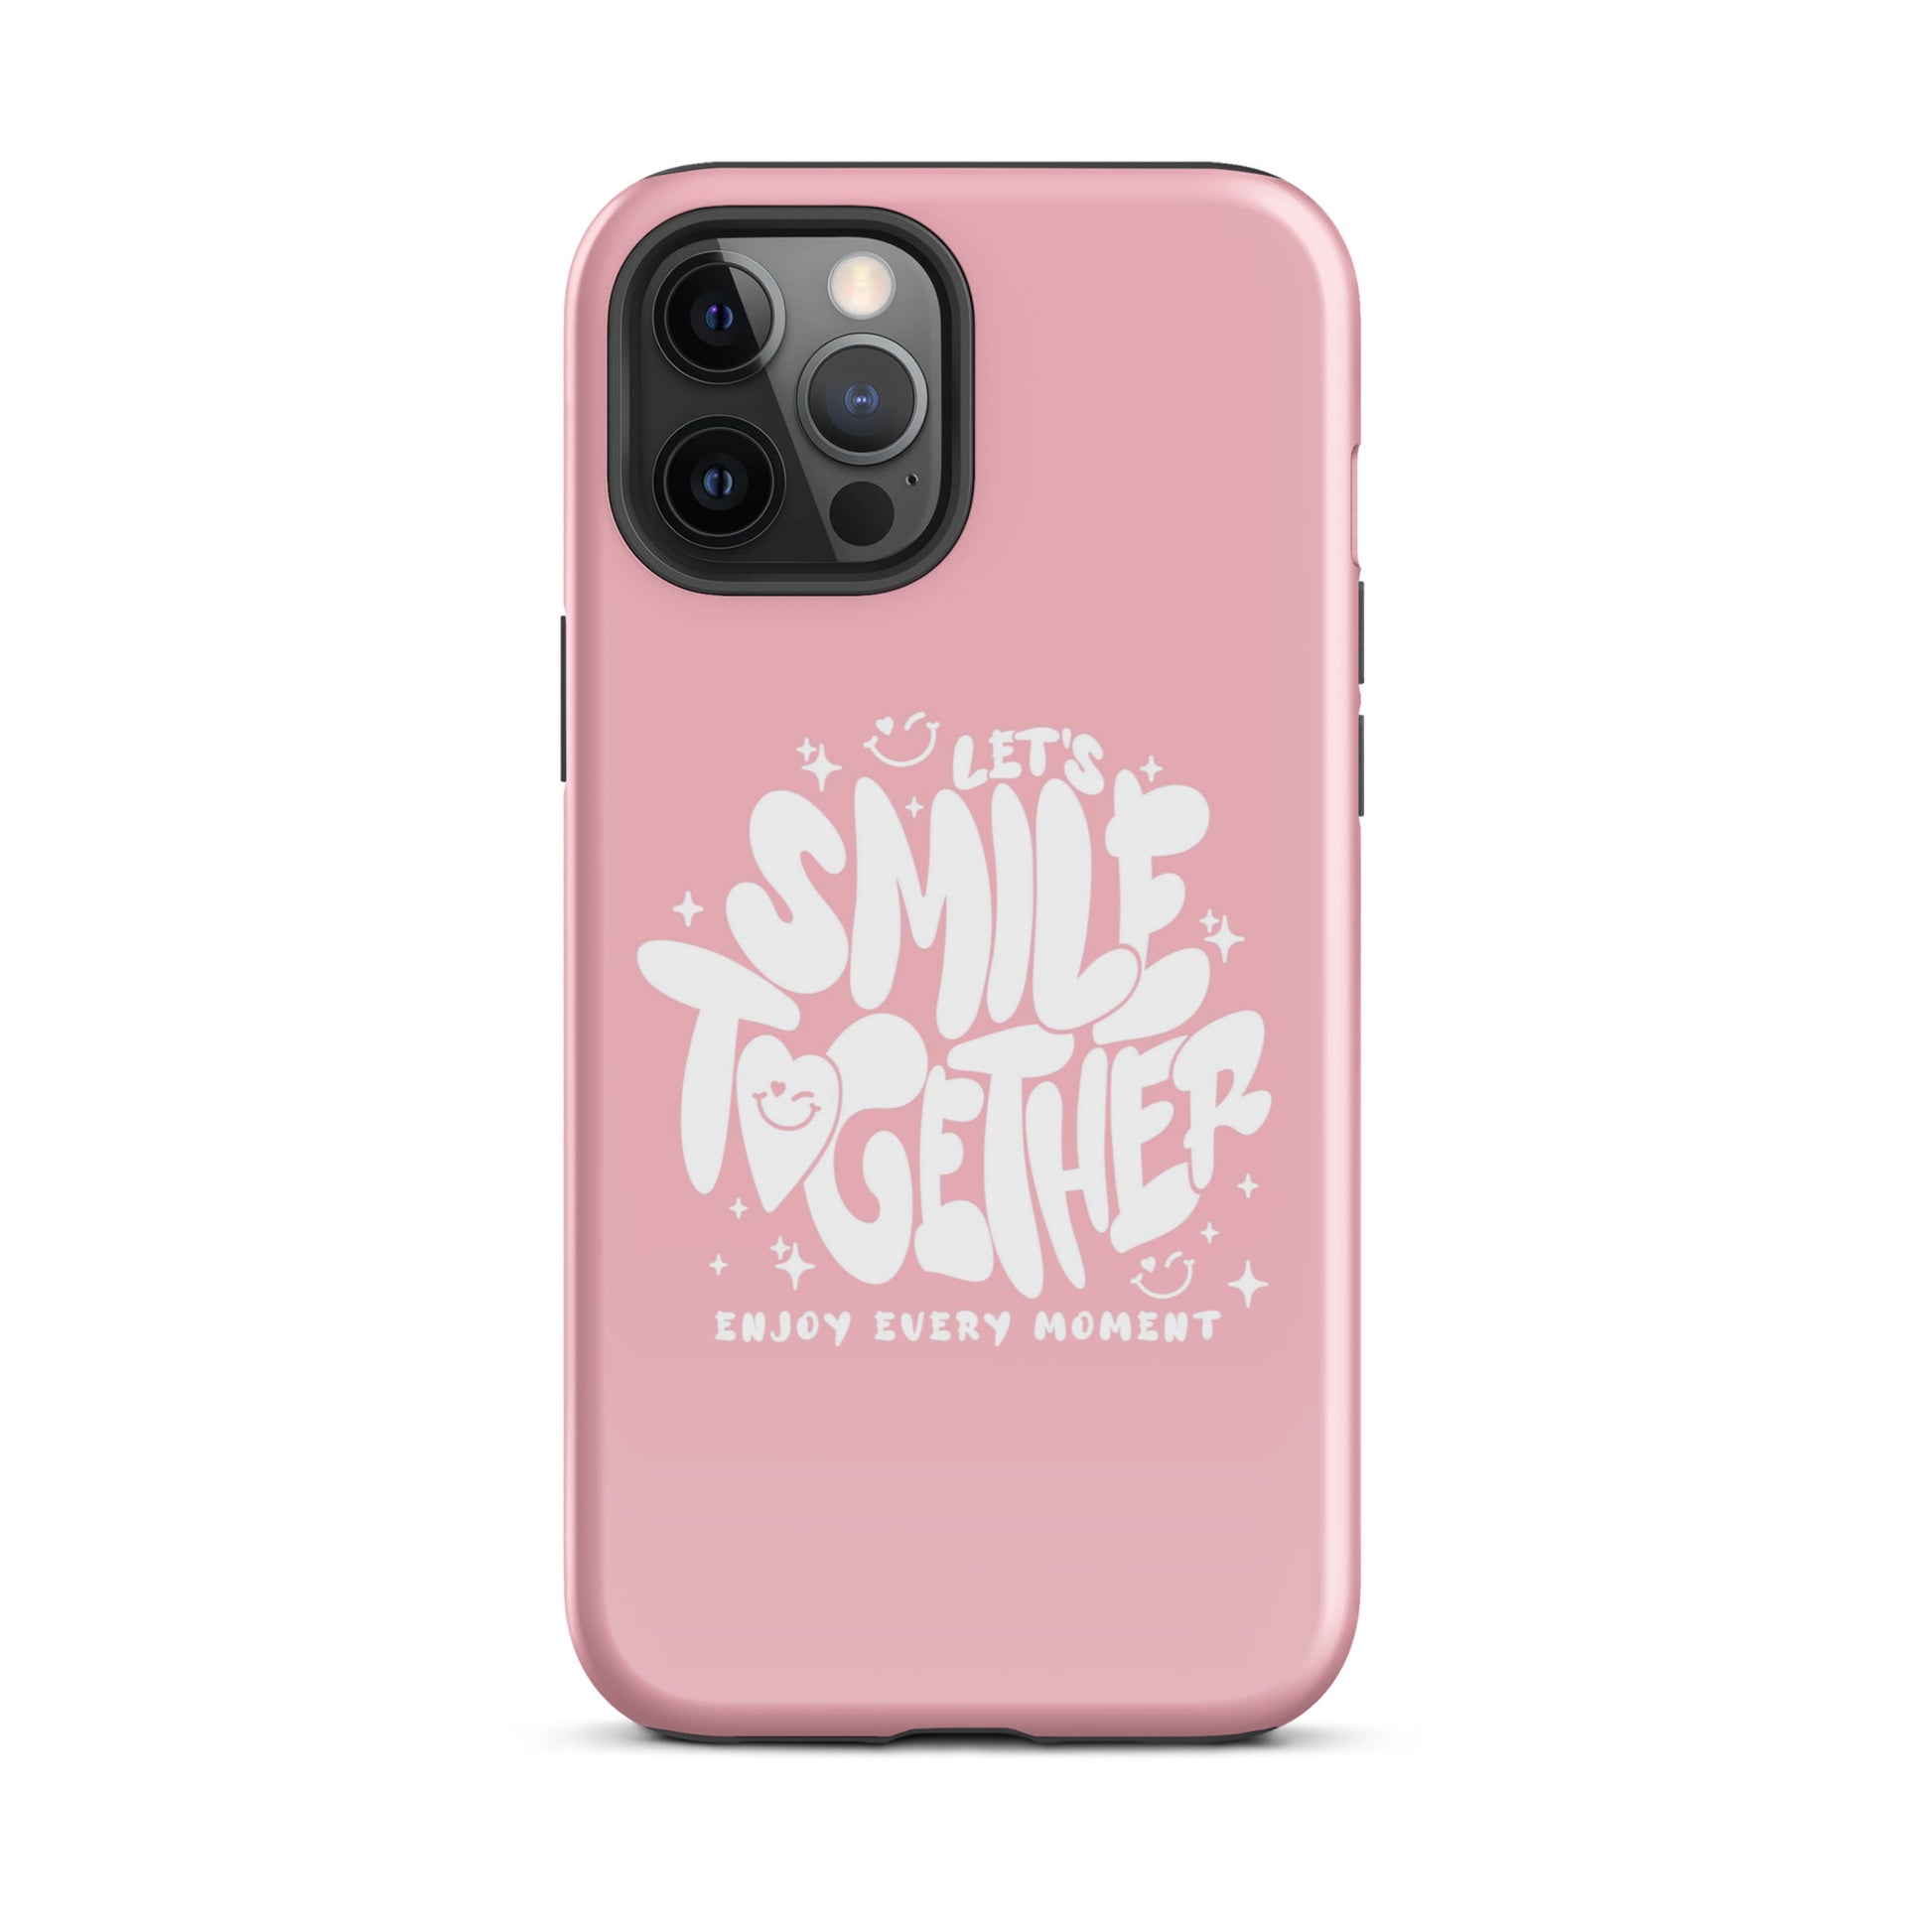 Smile Together iPhone Case iPhone 12 Pro Max Glossy